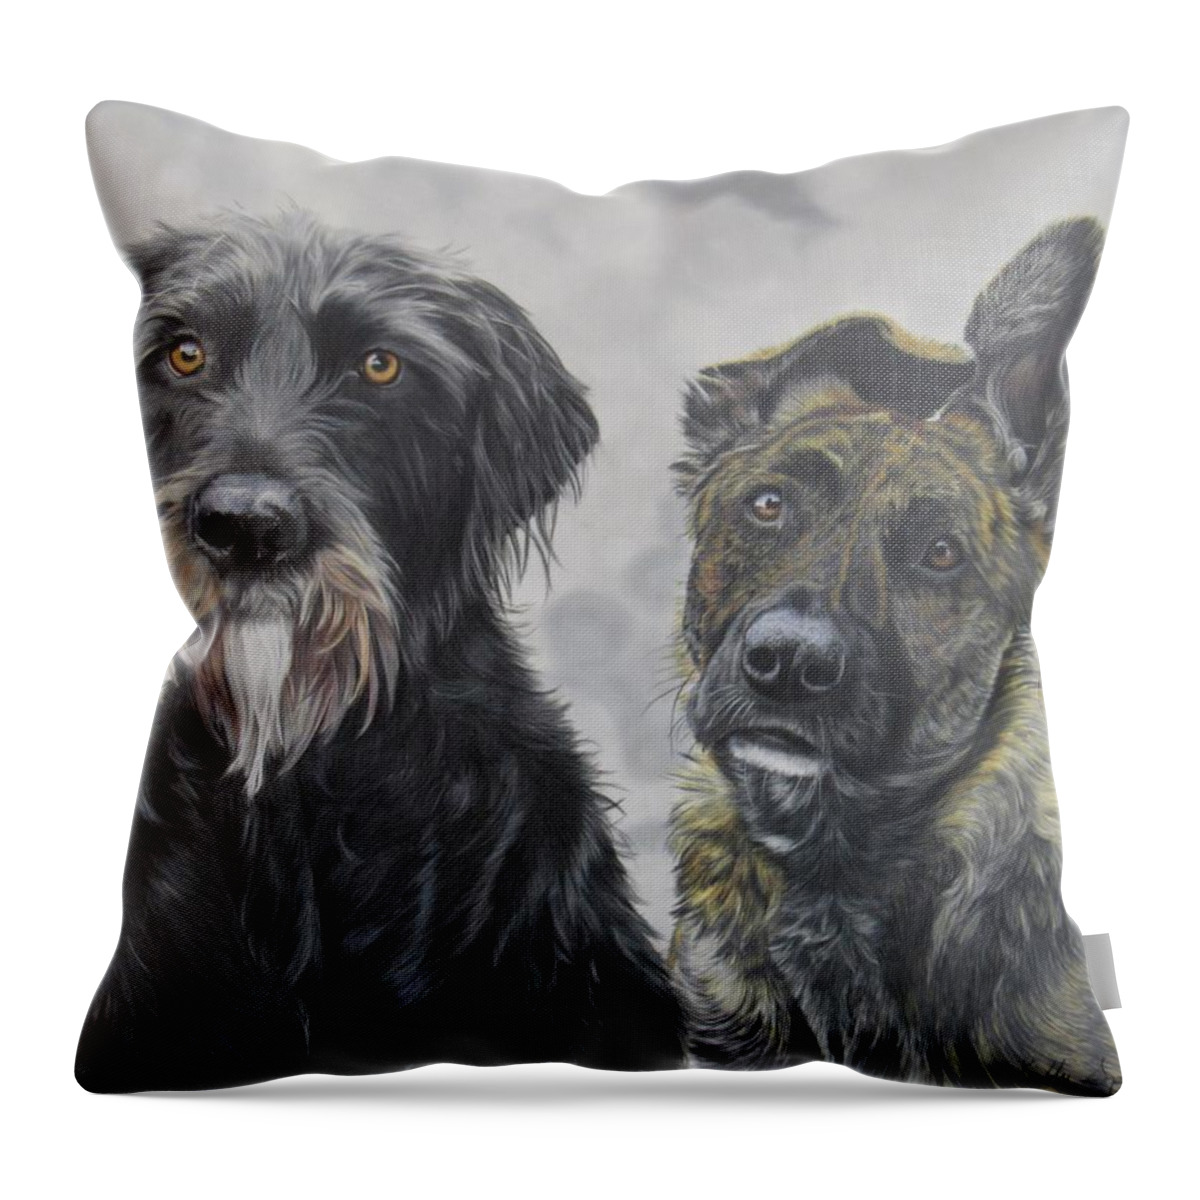 Dog Throw Pillow featuring the drawing Best Friends by Kelly Speros